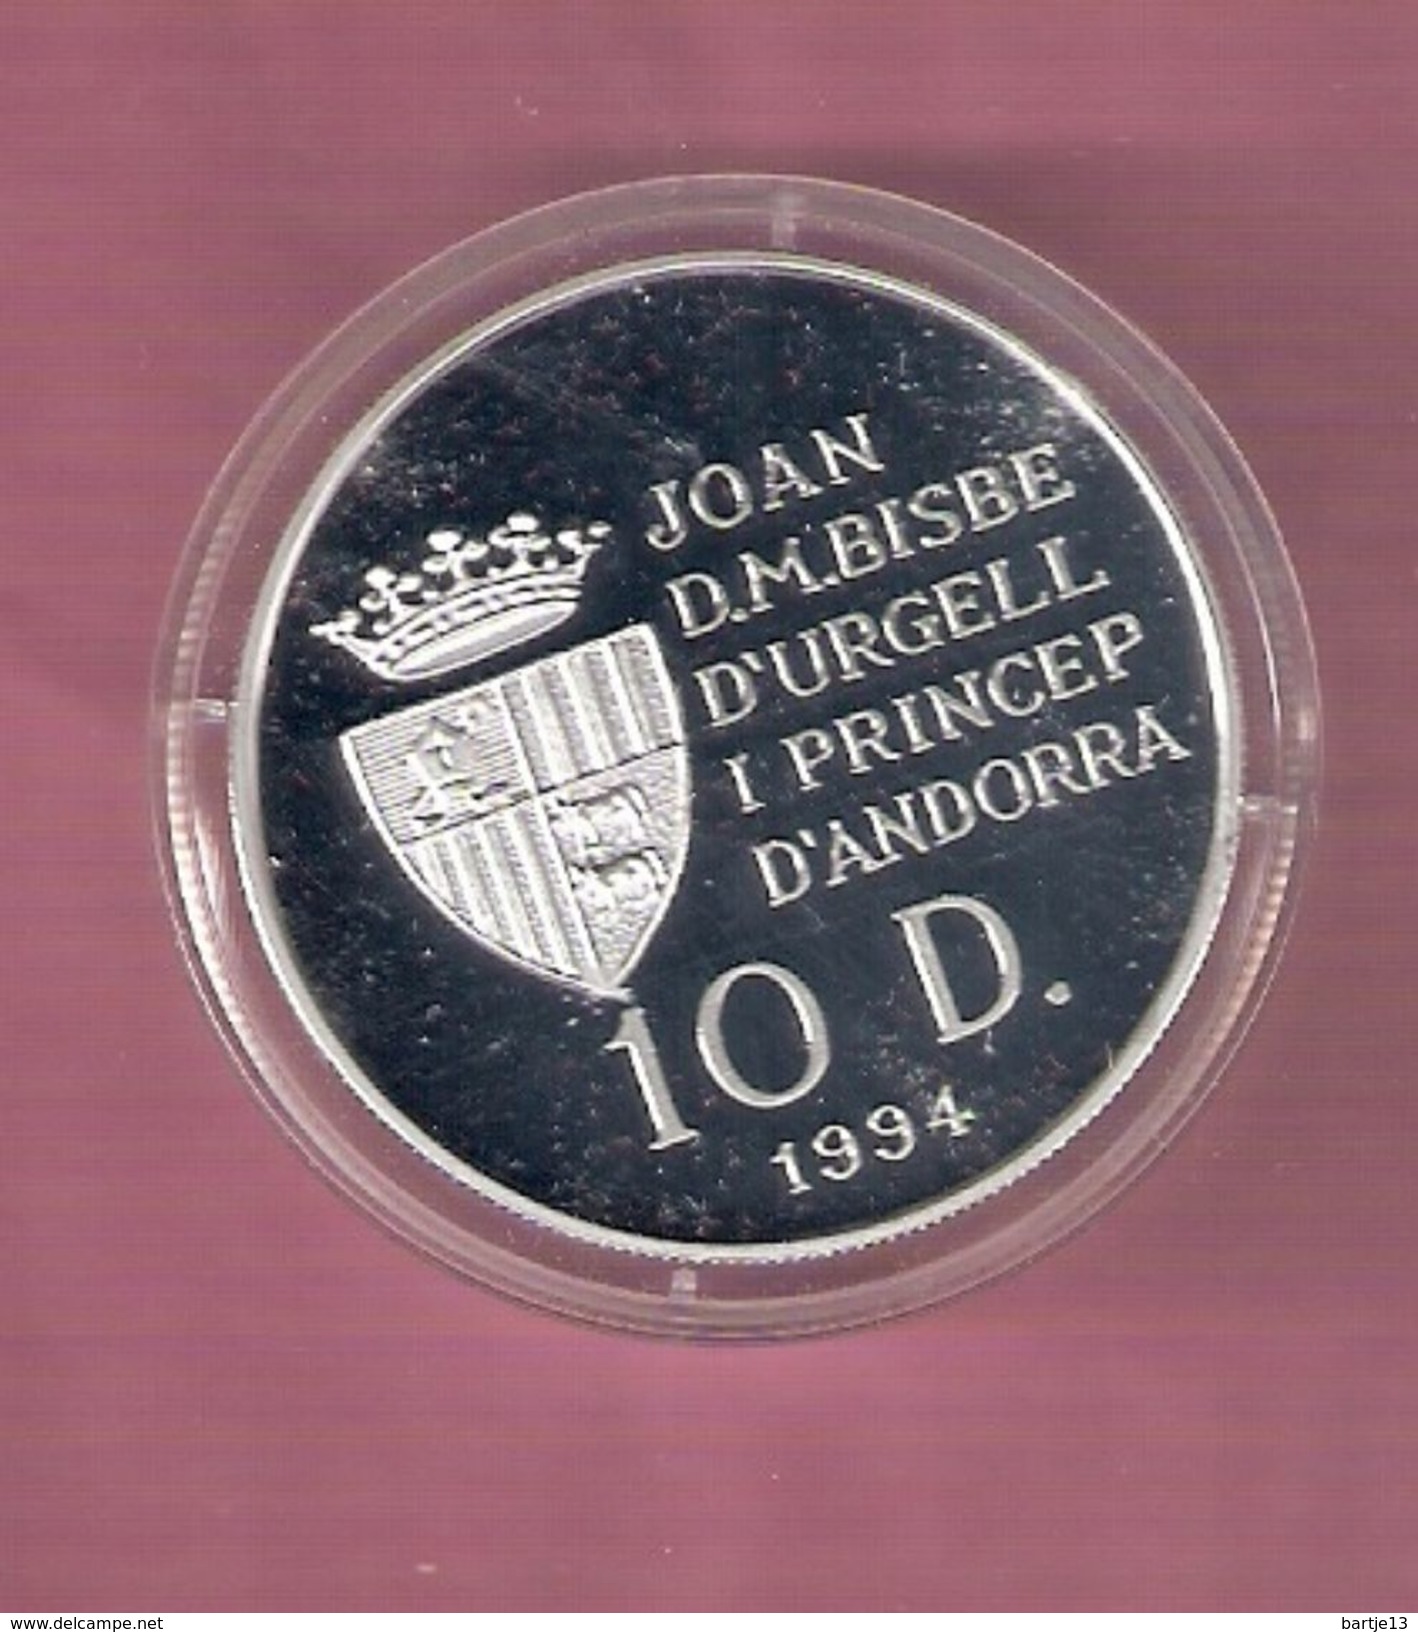 ANDORRA 10 DINARA 1994 SILVER PROOF OLYMPICS CYCLING 1995 - SCRATCHES ONLY ON CAPSEL - Andorra